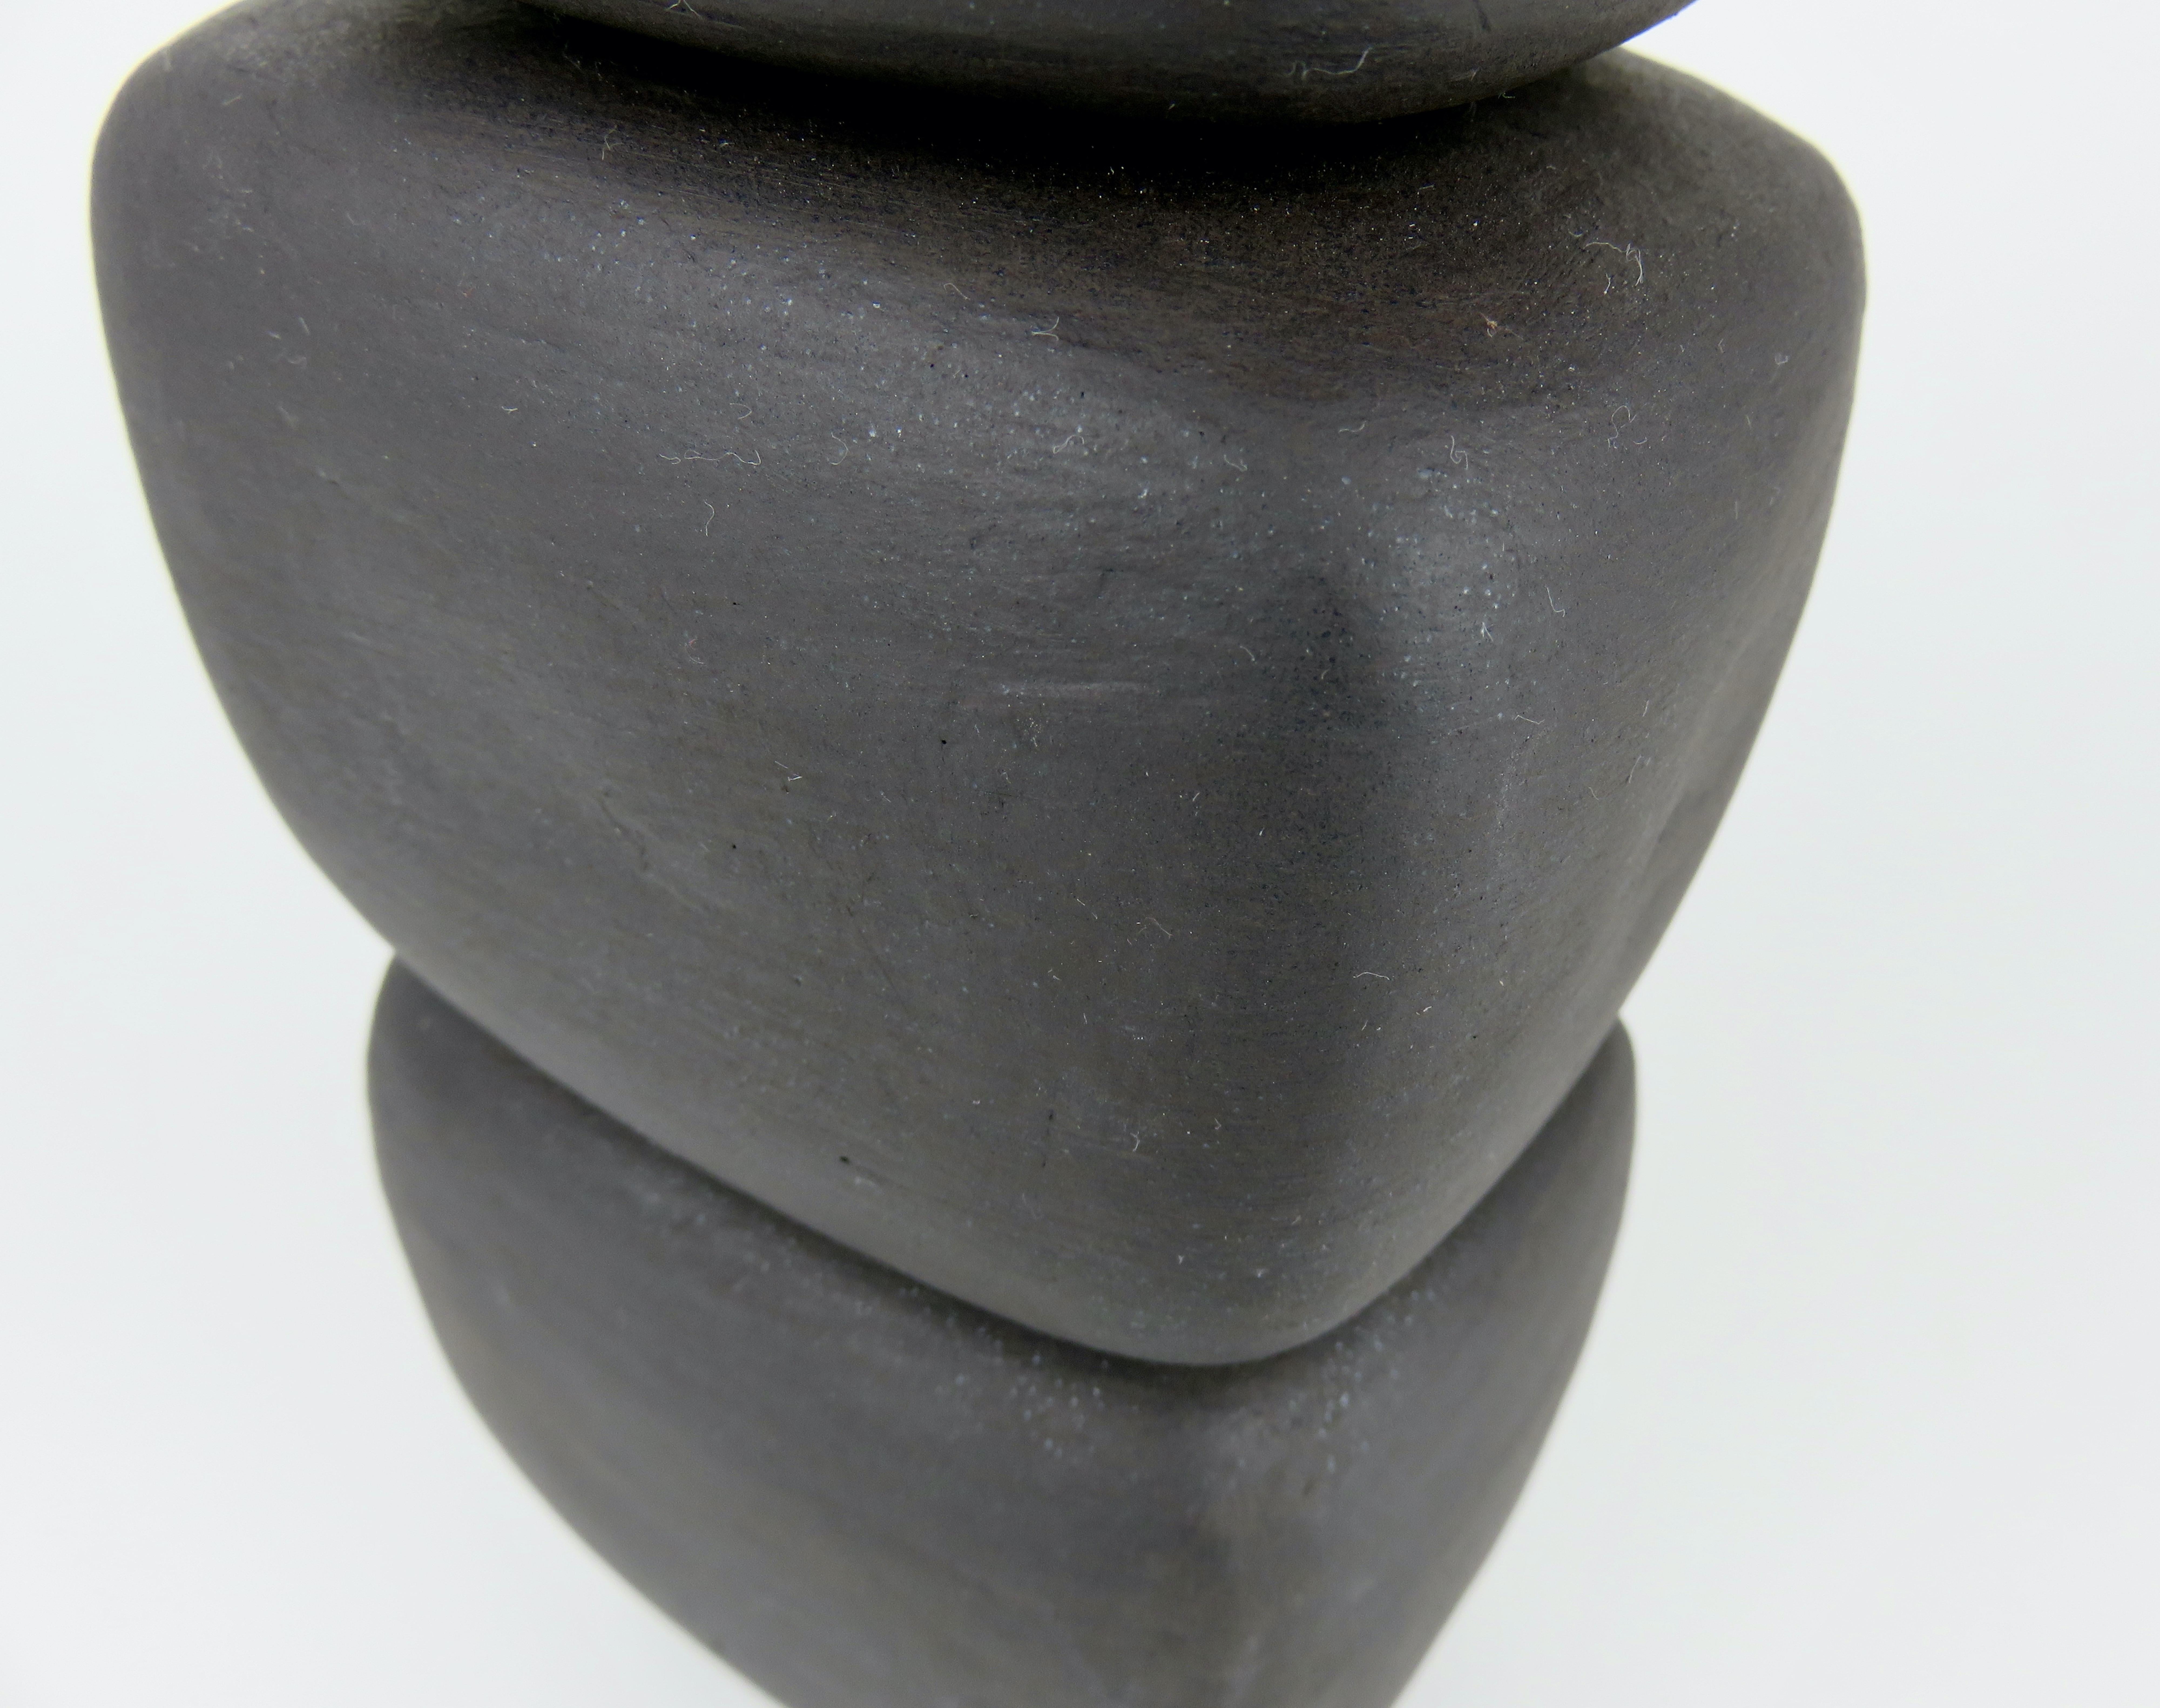 Hand Built Ceramic Sculpture, Dark Brown Stacked Cubes with White Crinkled Top 6